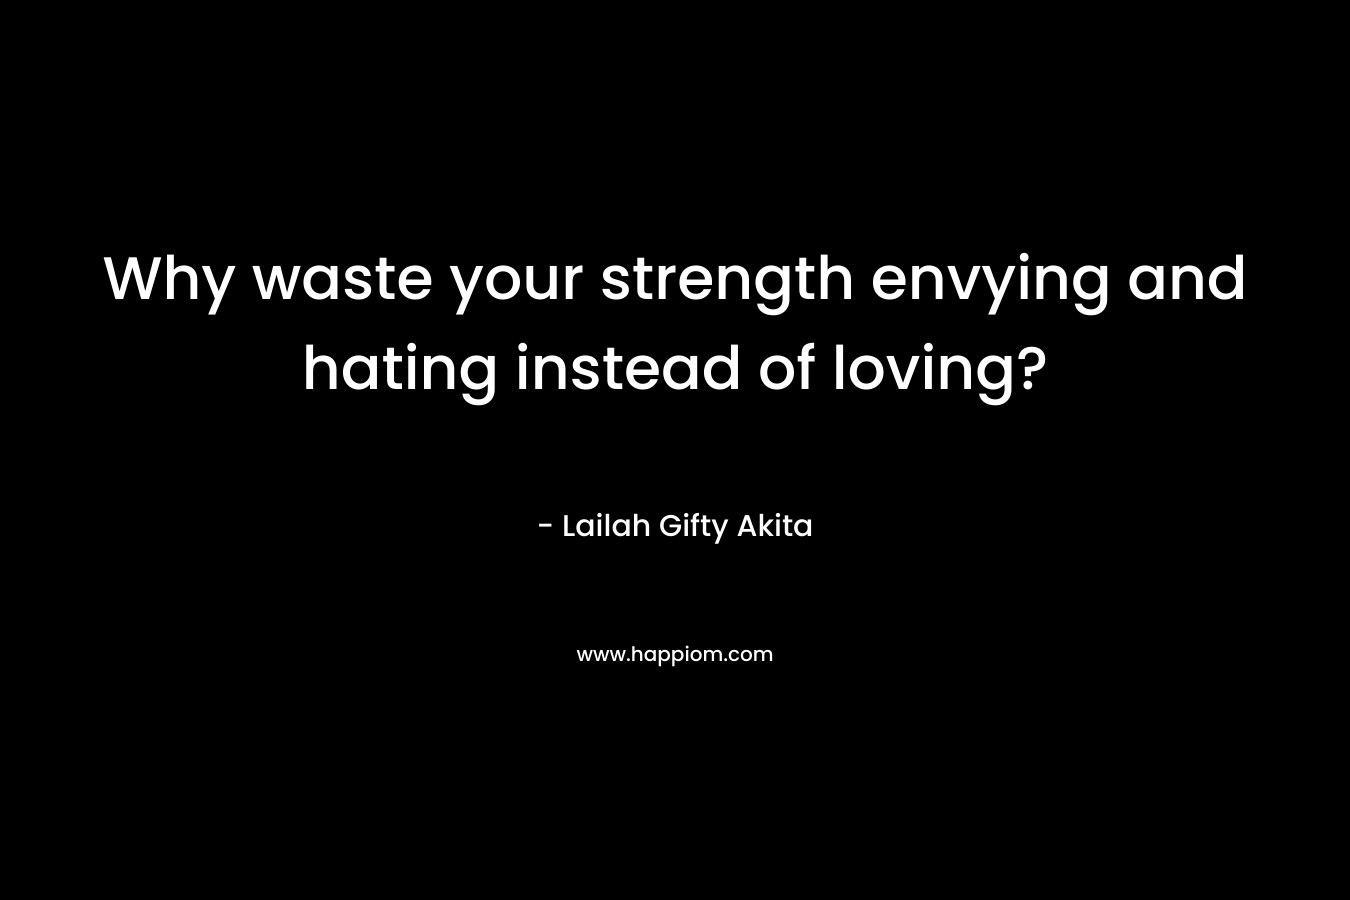 Why waste your strength envying and hating instead of loving? – Lailah Gifty Akita